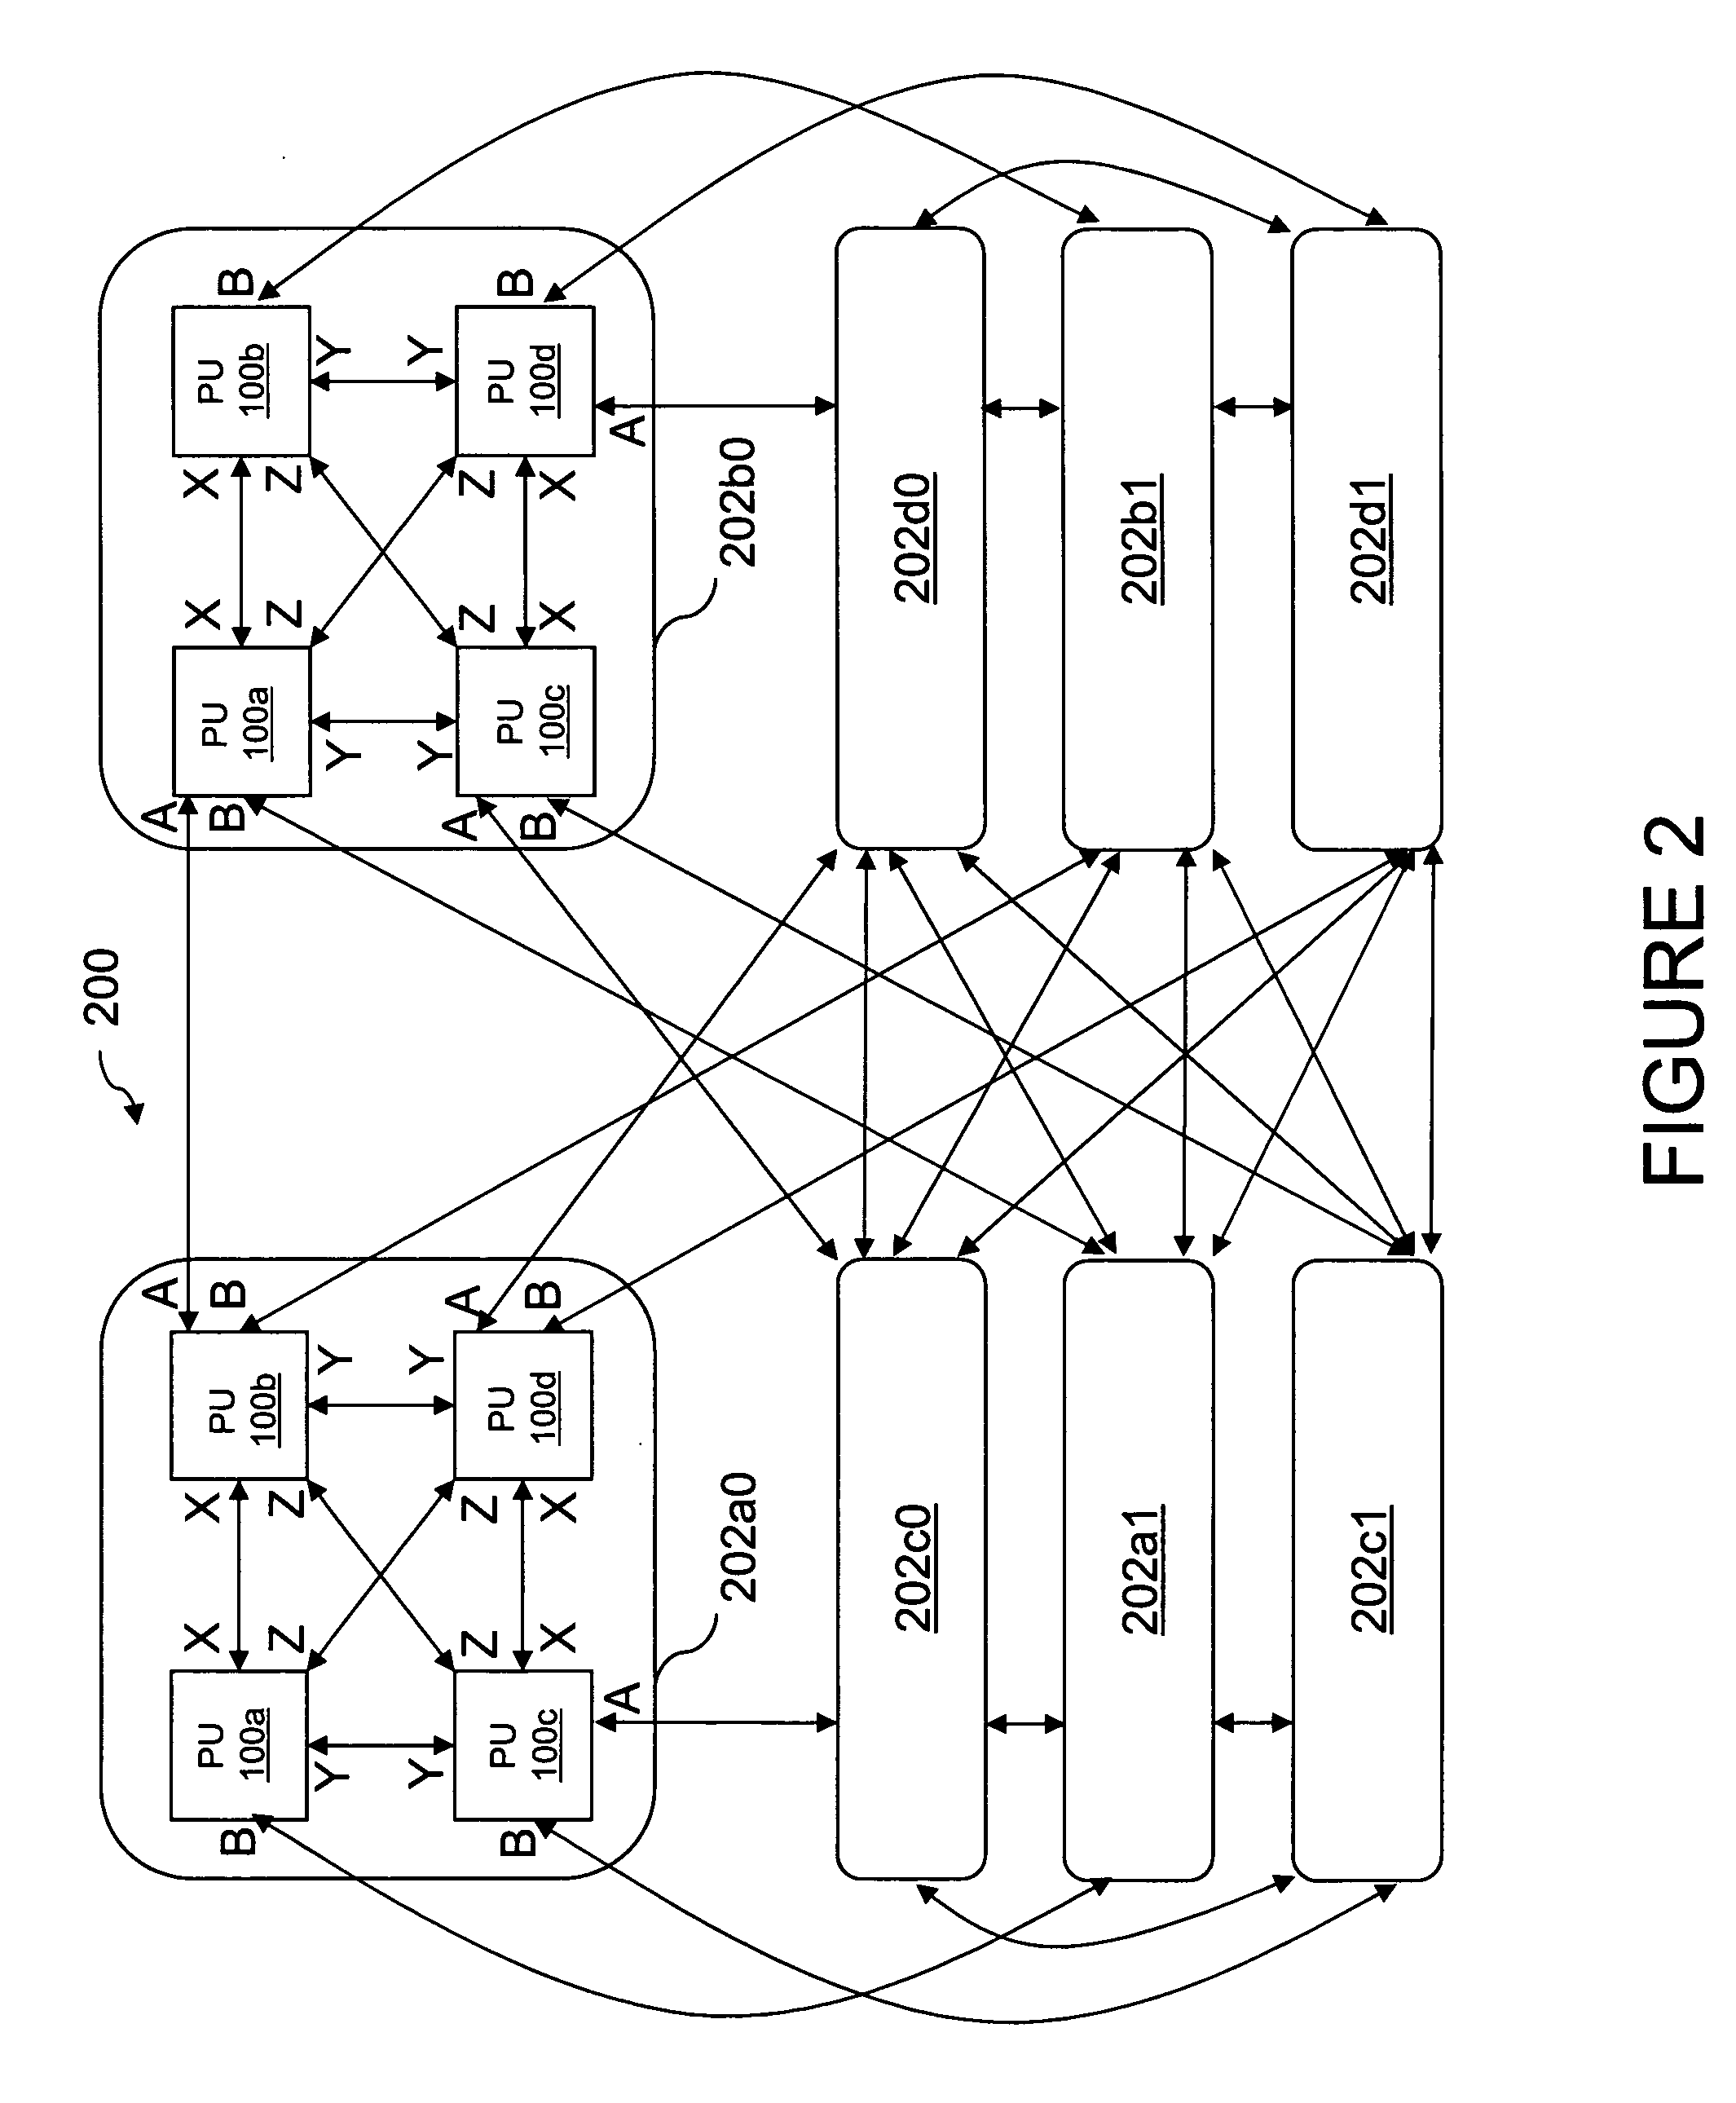 Data processing system, method and interconnect fabric having a partial response rebroadcast